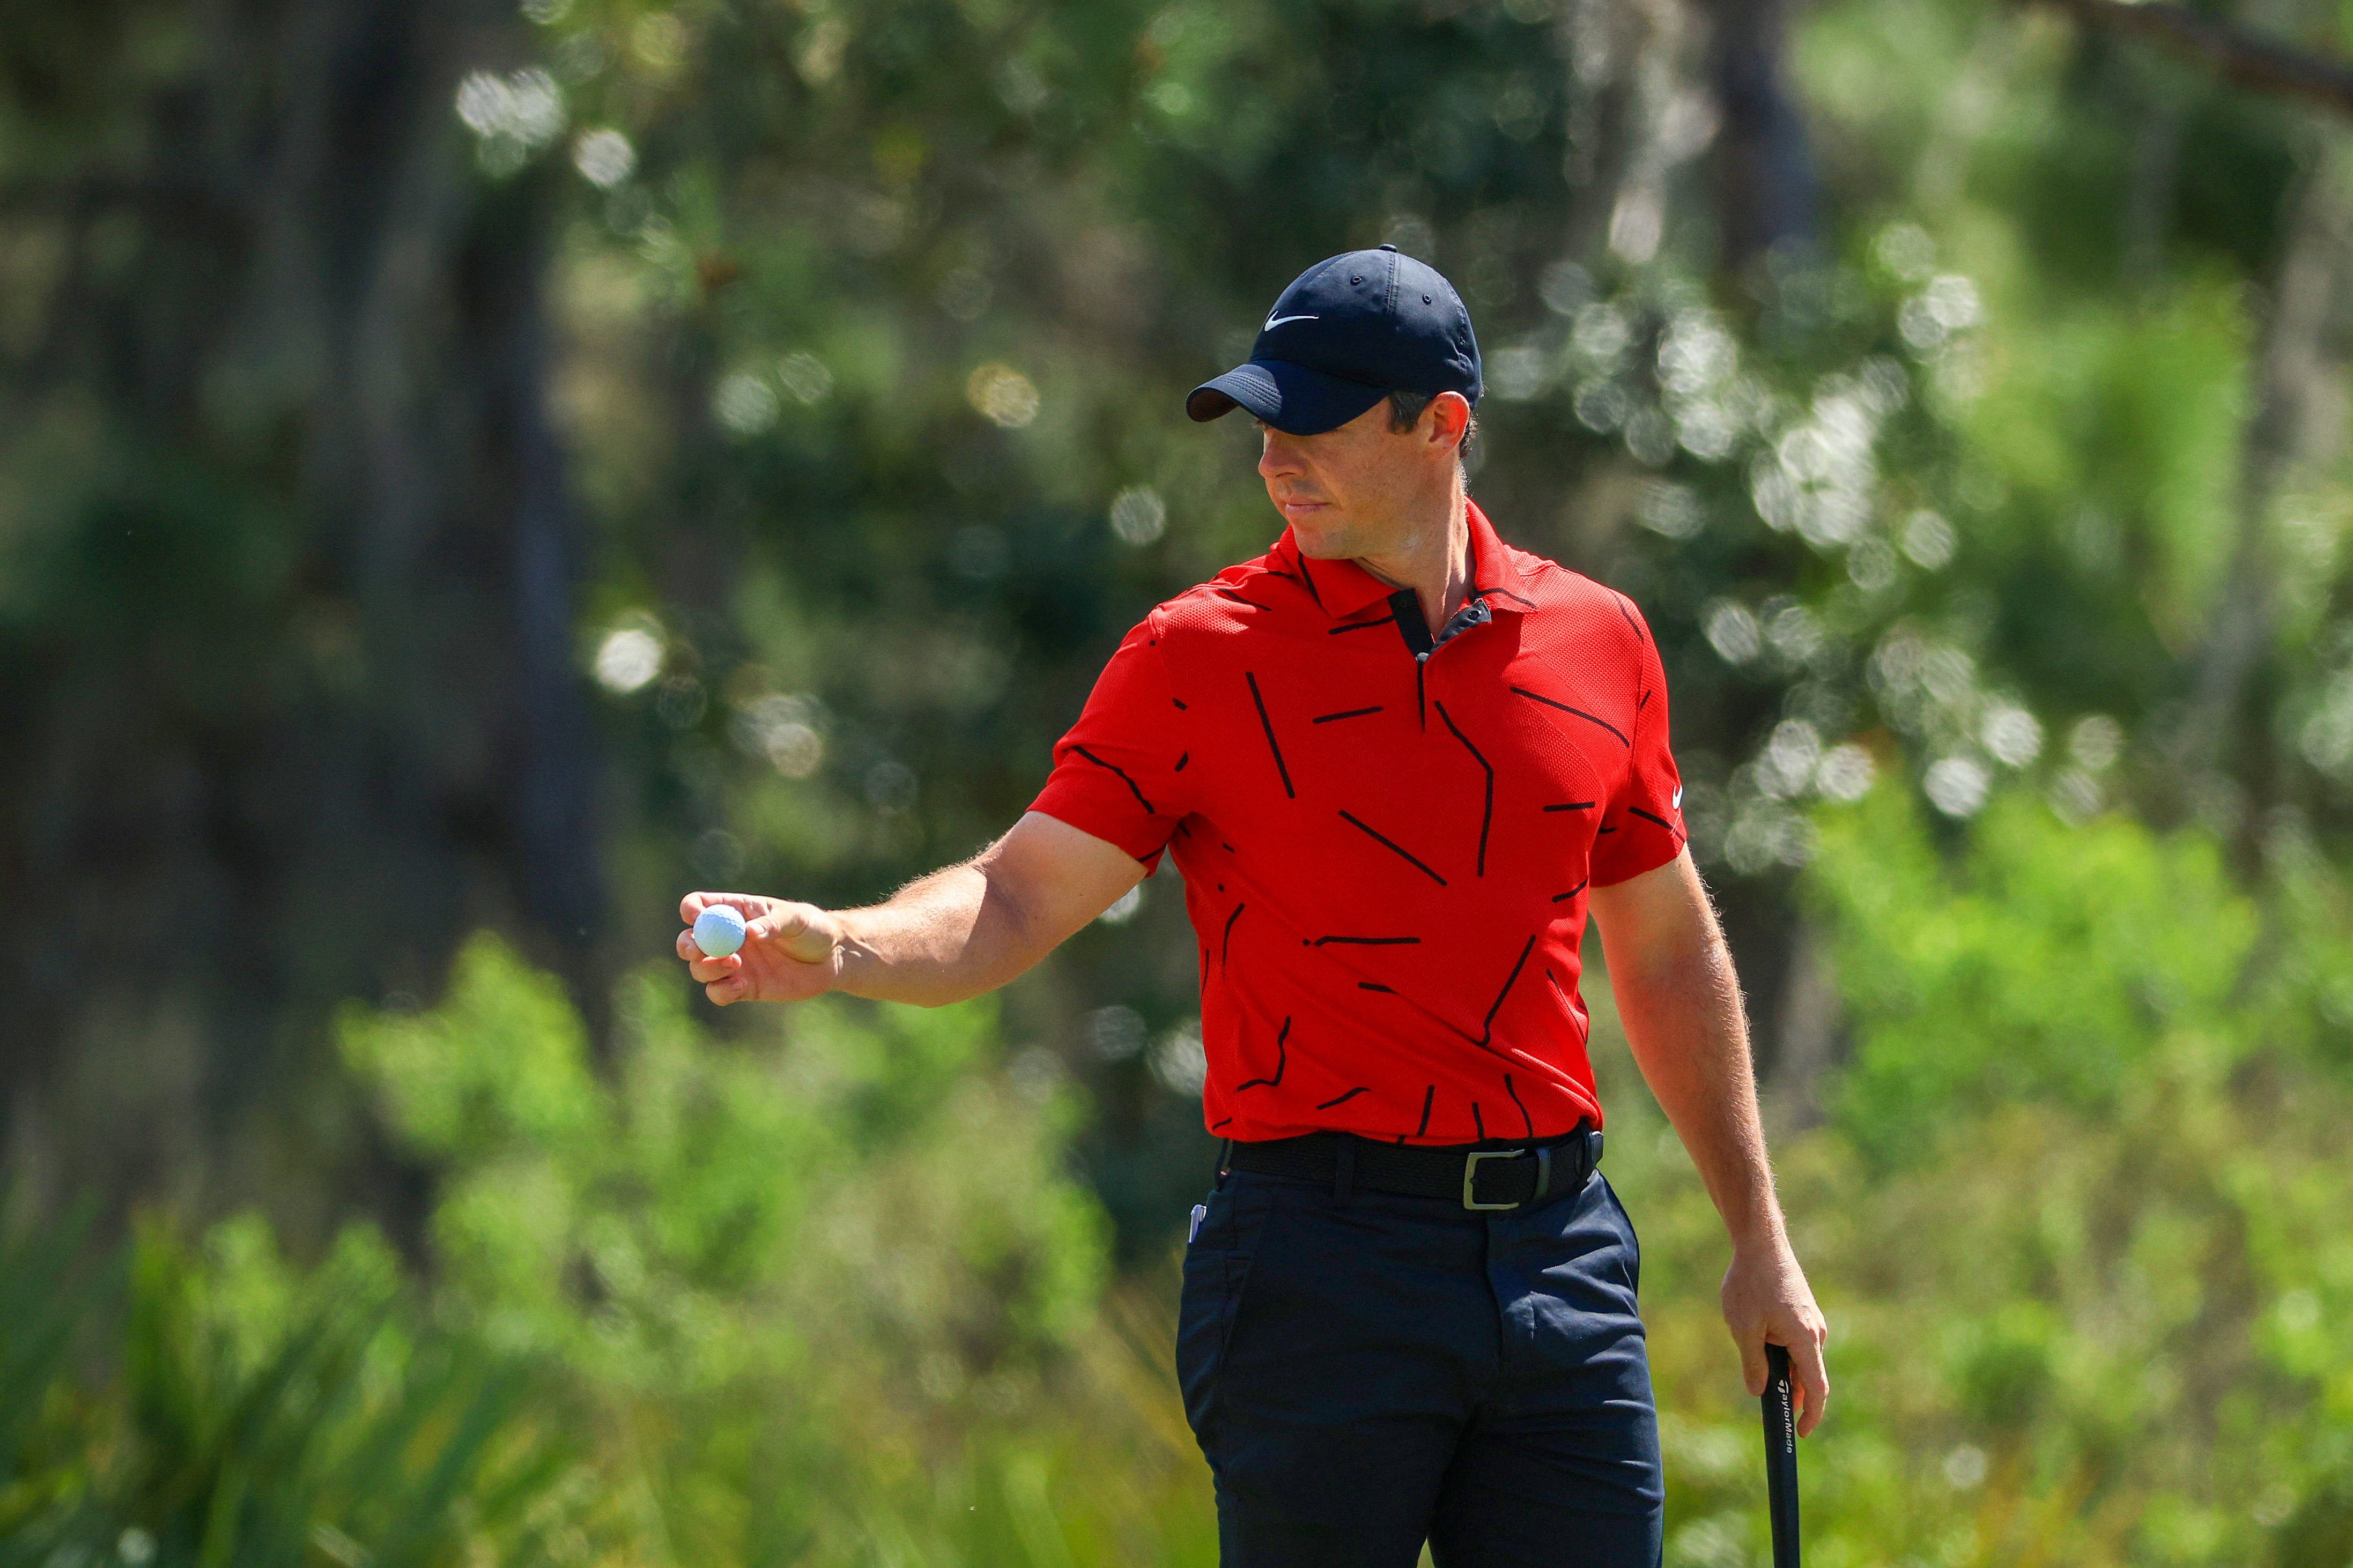 Rory McIlroy during the final round of World Golf Championships-Workday Championship in Bradenton, Florida.